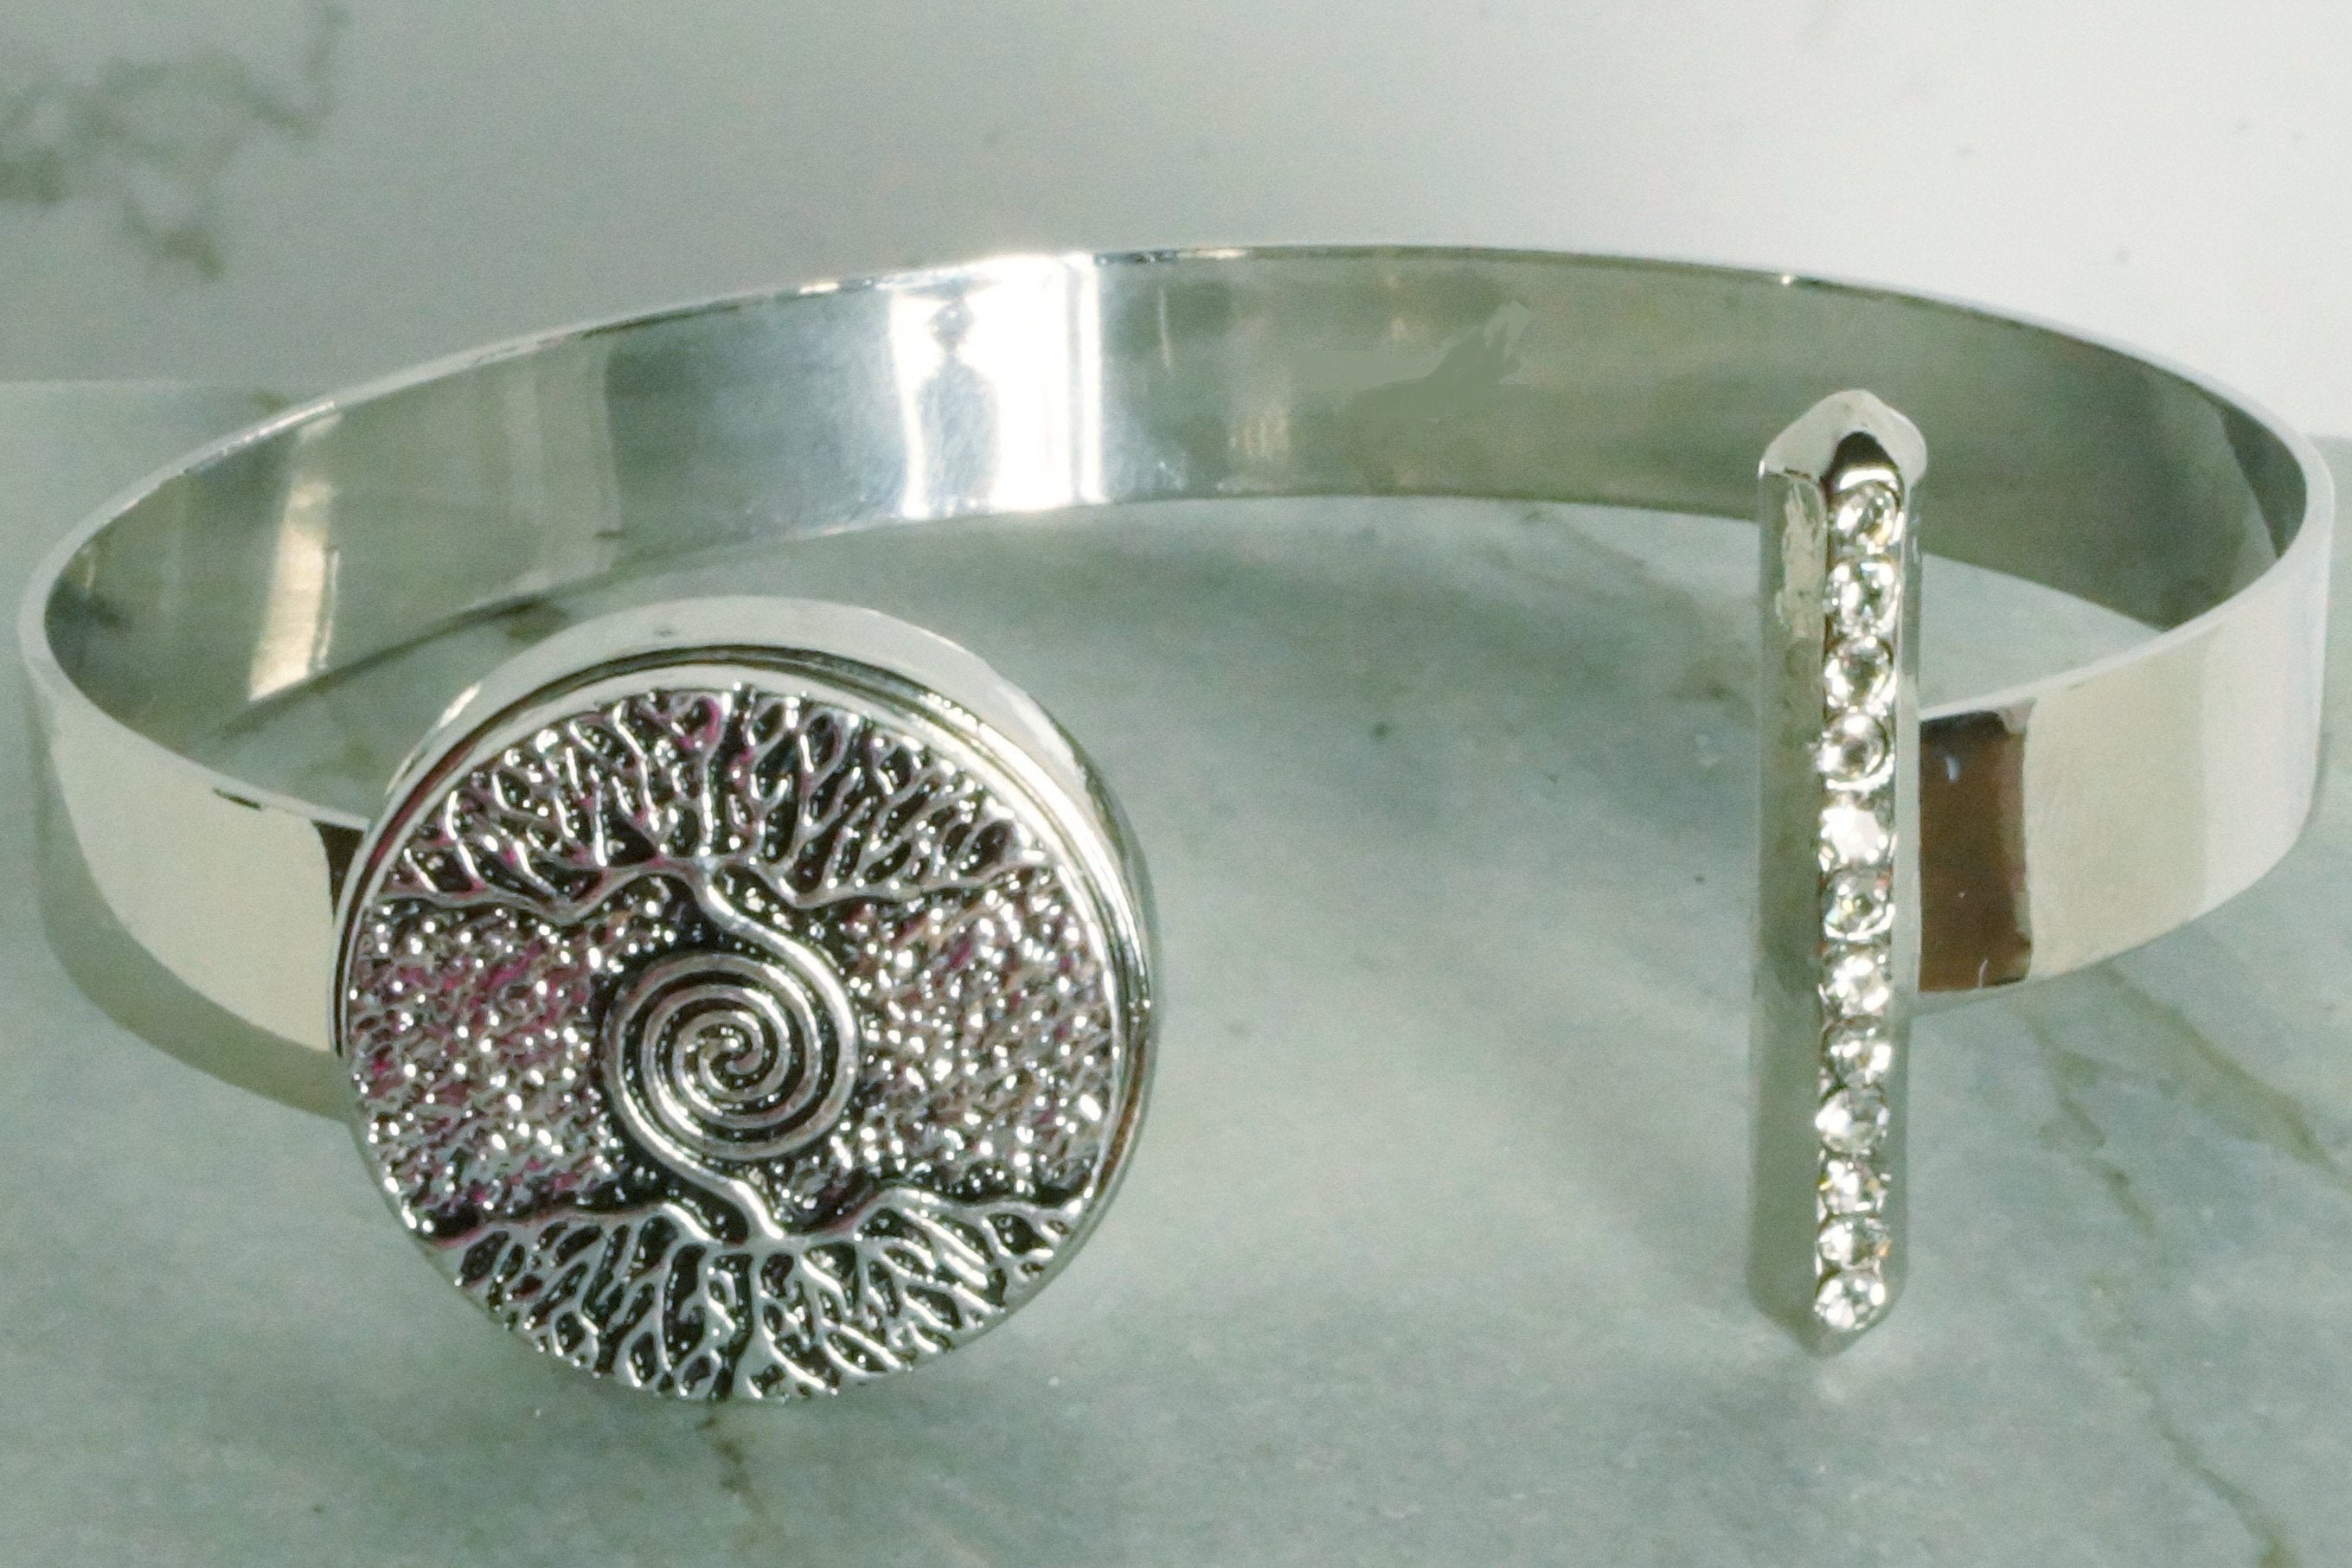 Bracelet - with Snap Buttons - Tree of Life